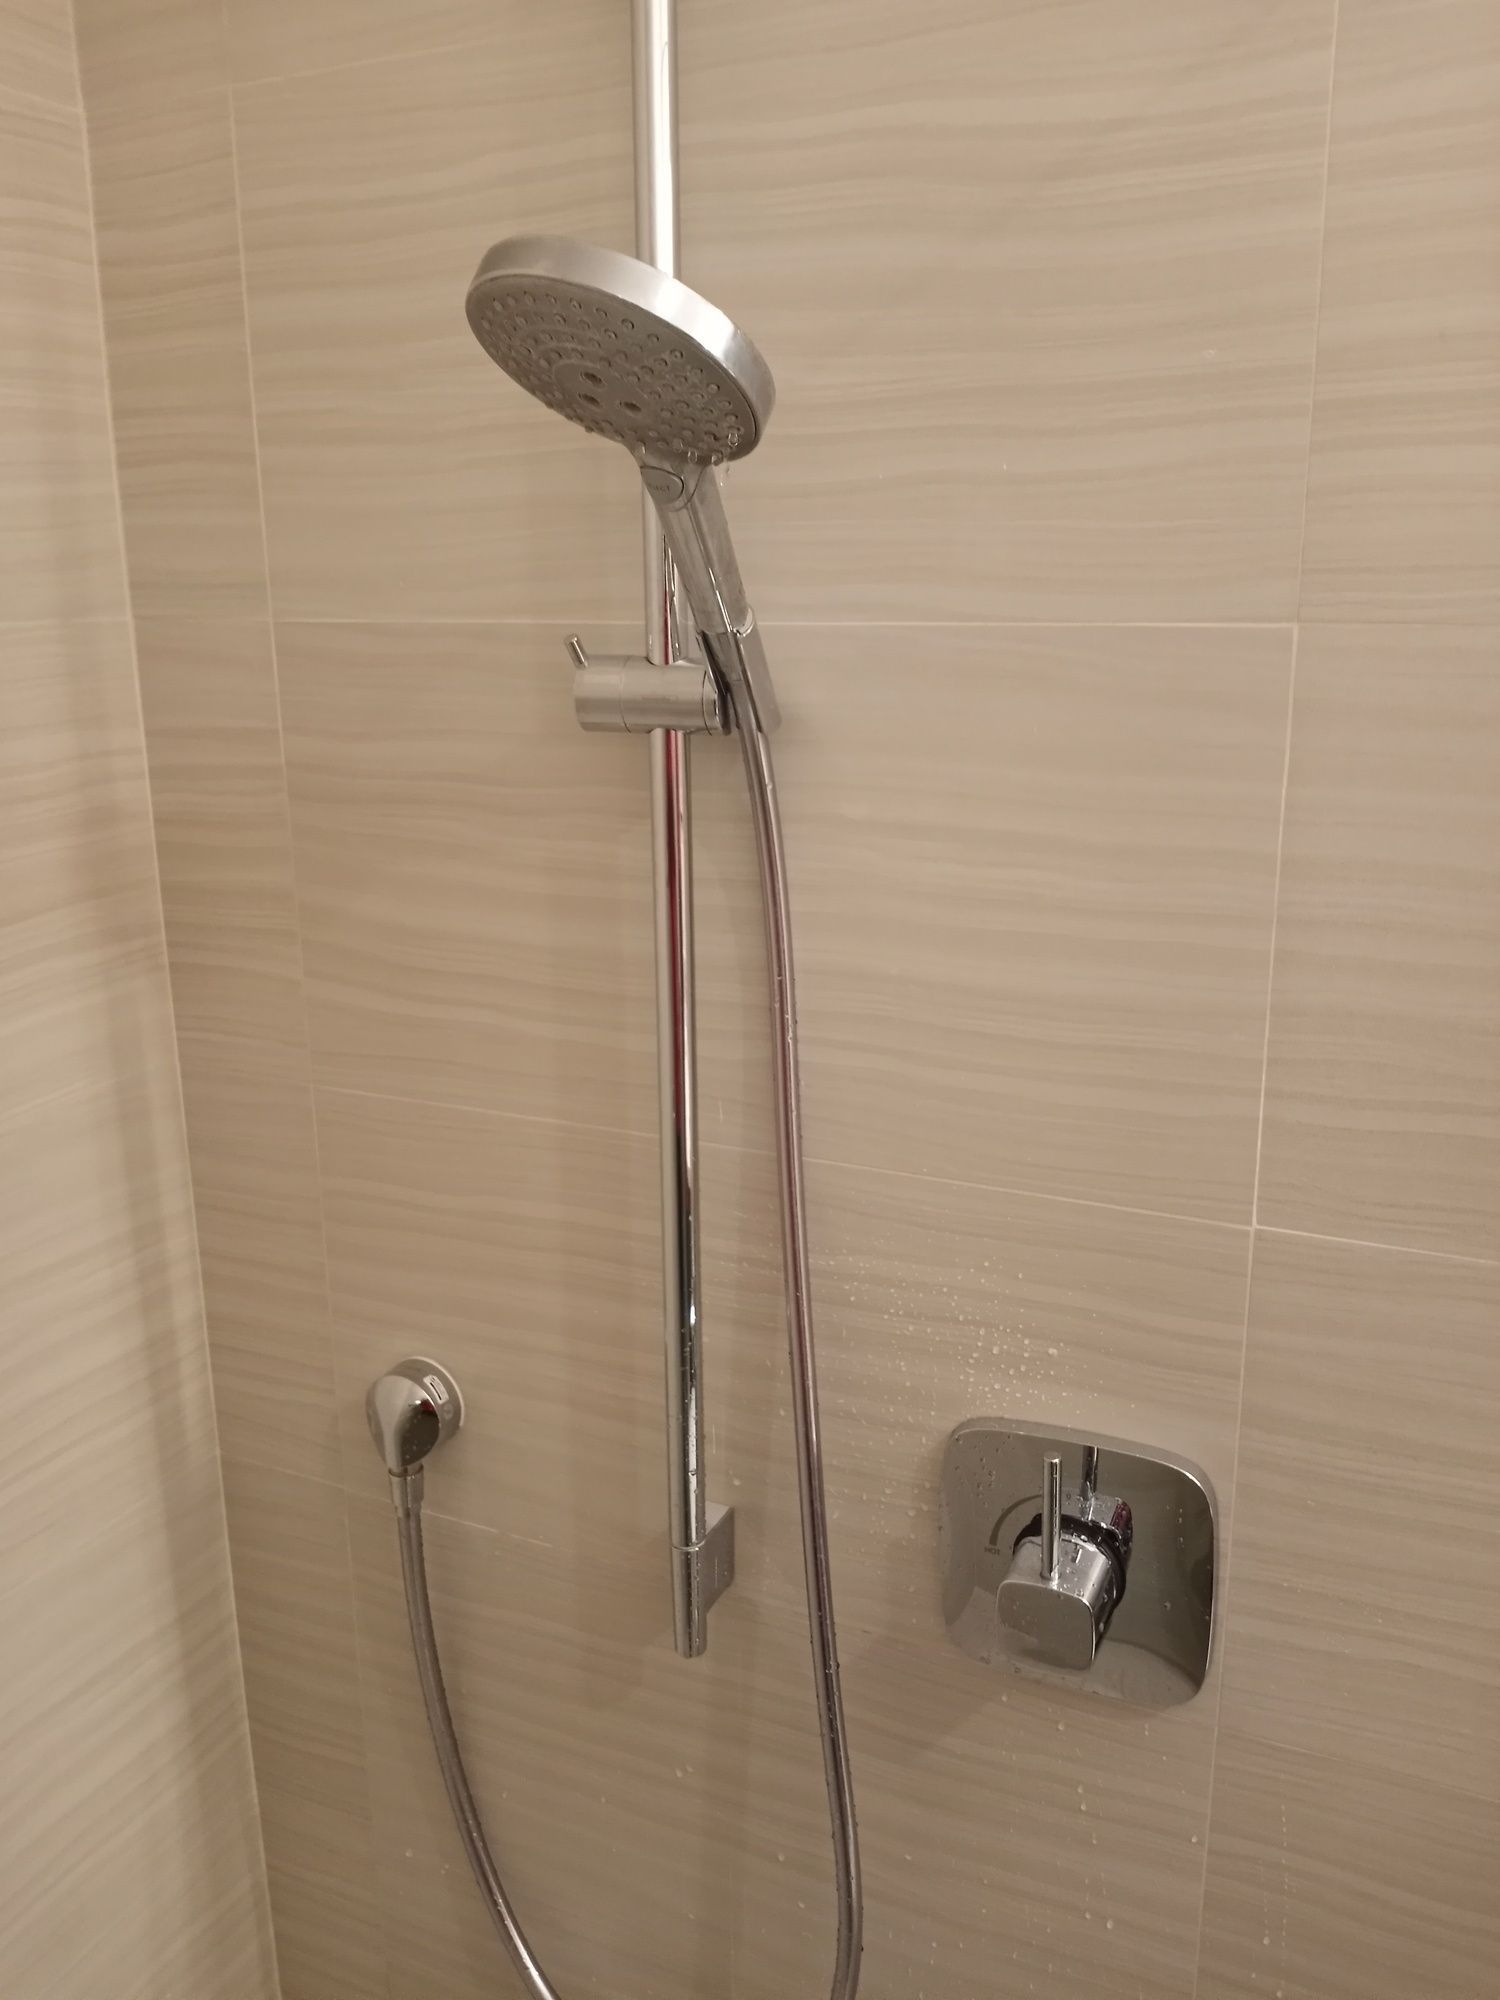 a close up of a shower head in a bathroom .